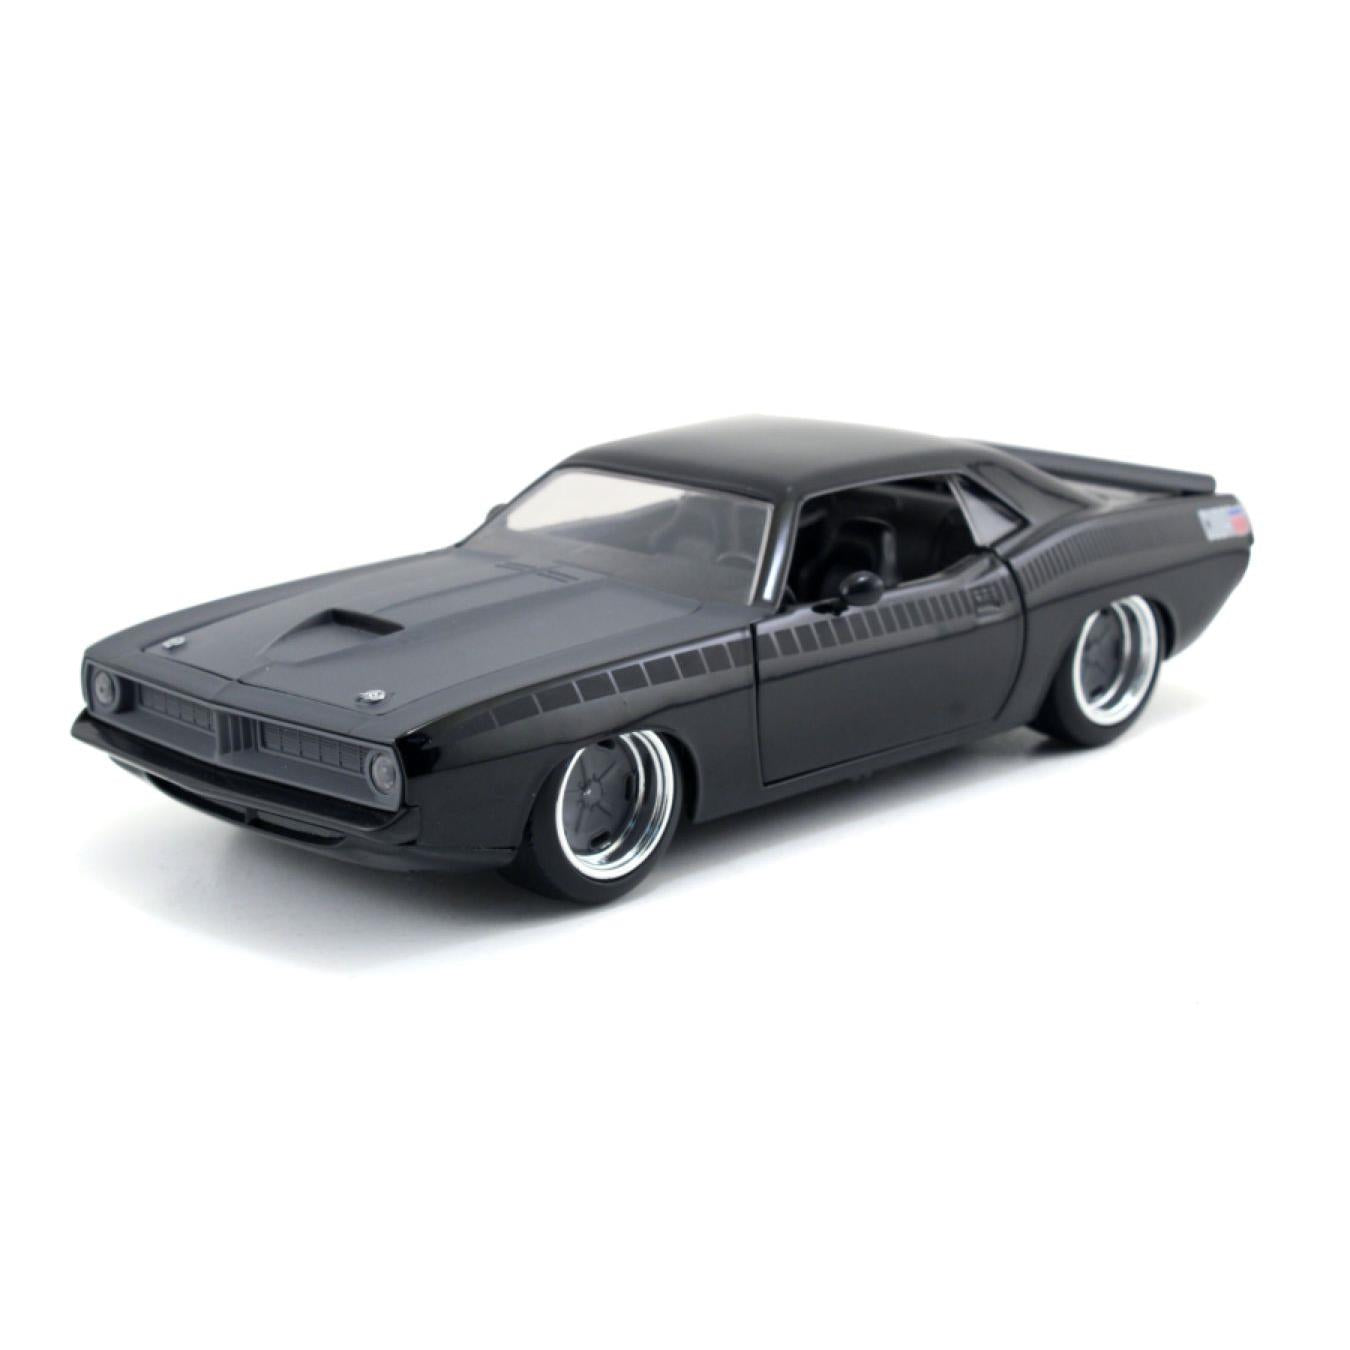 fast and furious - 1973 plymouth barracuda 1:24 scale hollywood ride vehicle replica